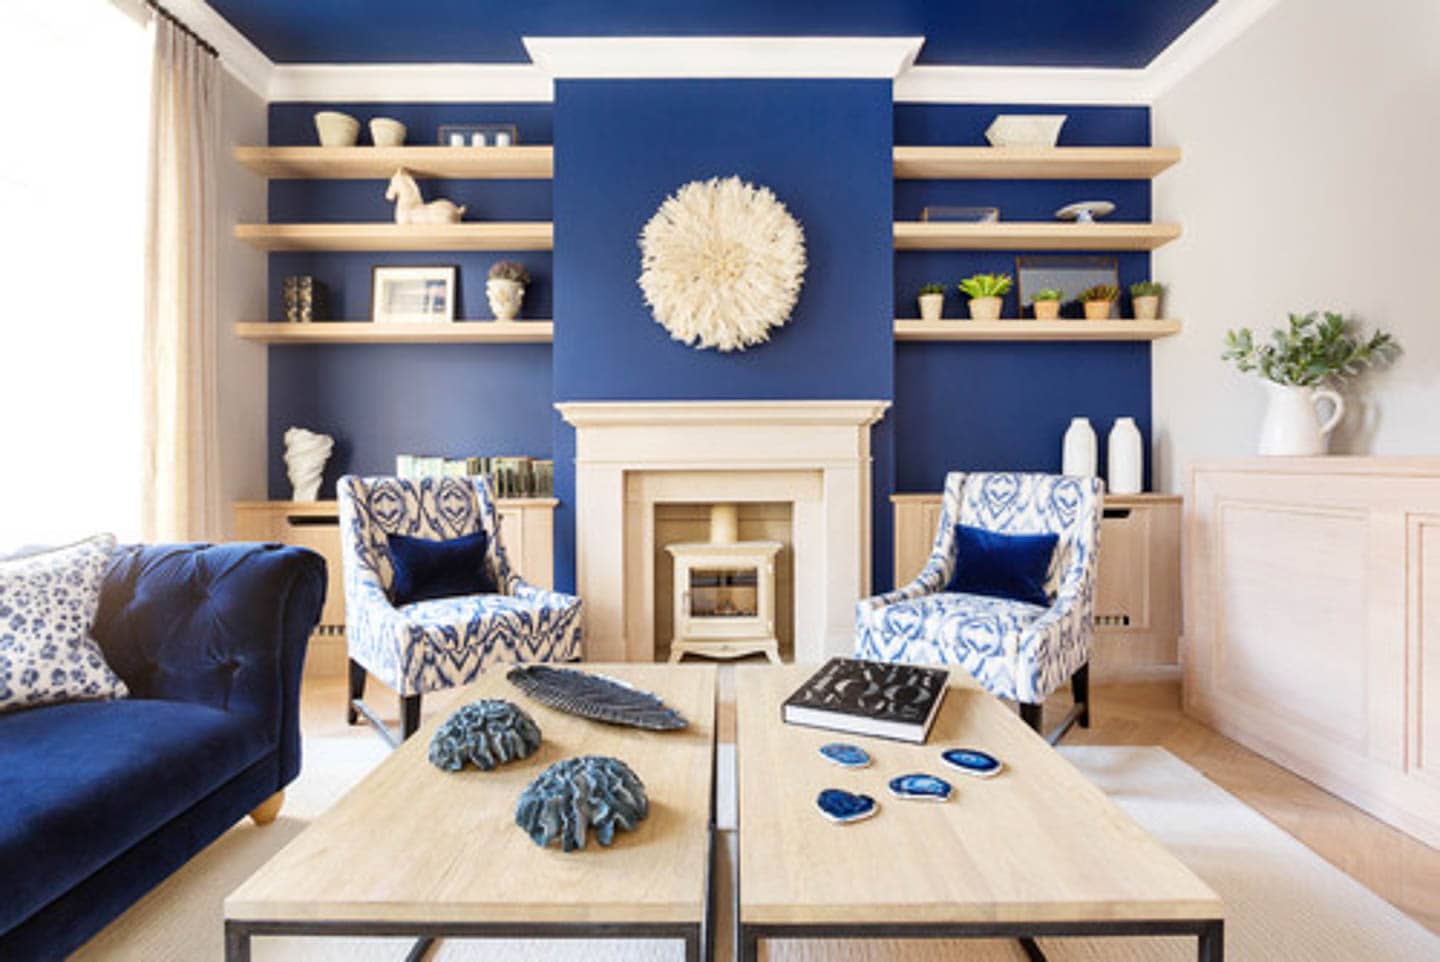 Living room with one dark blue wall and a dark blue ceiling